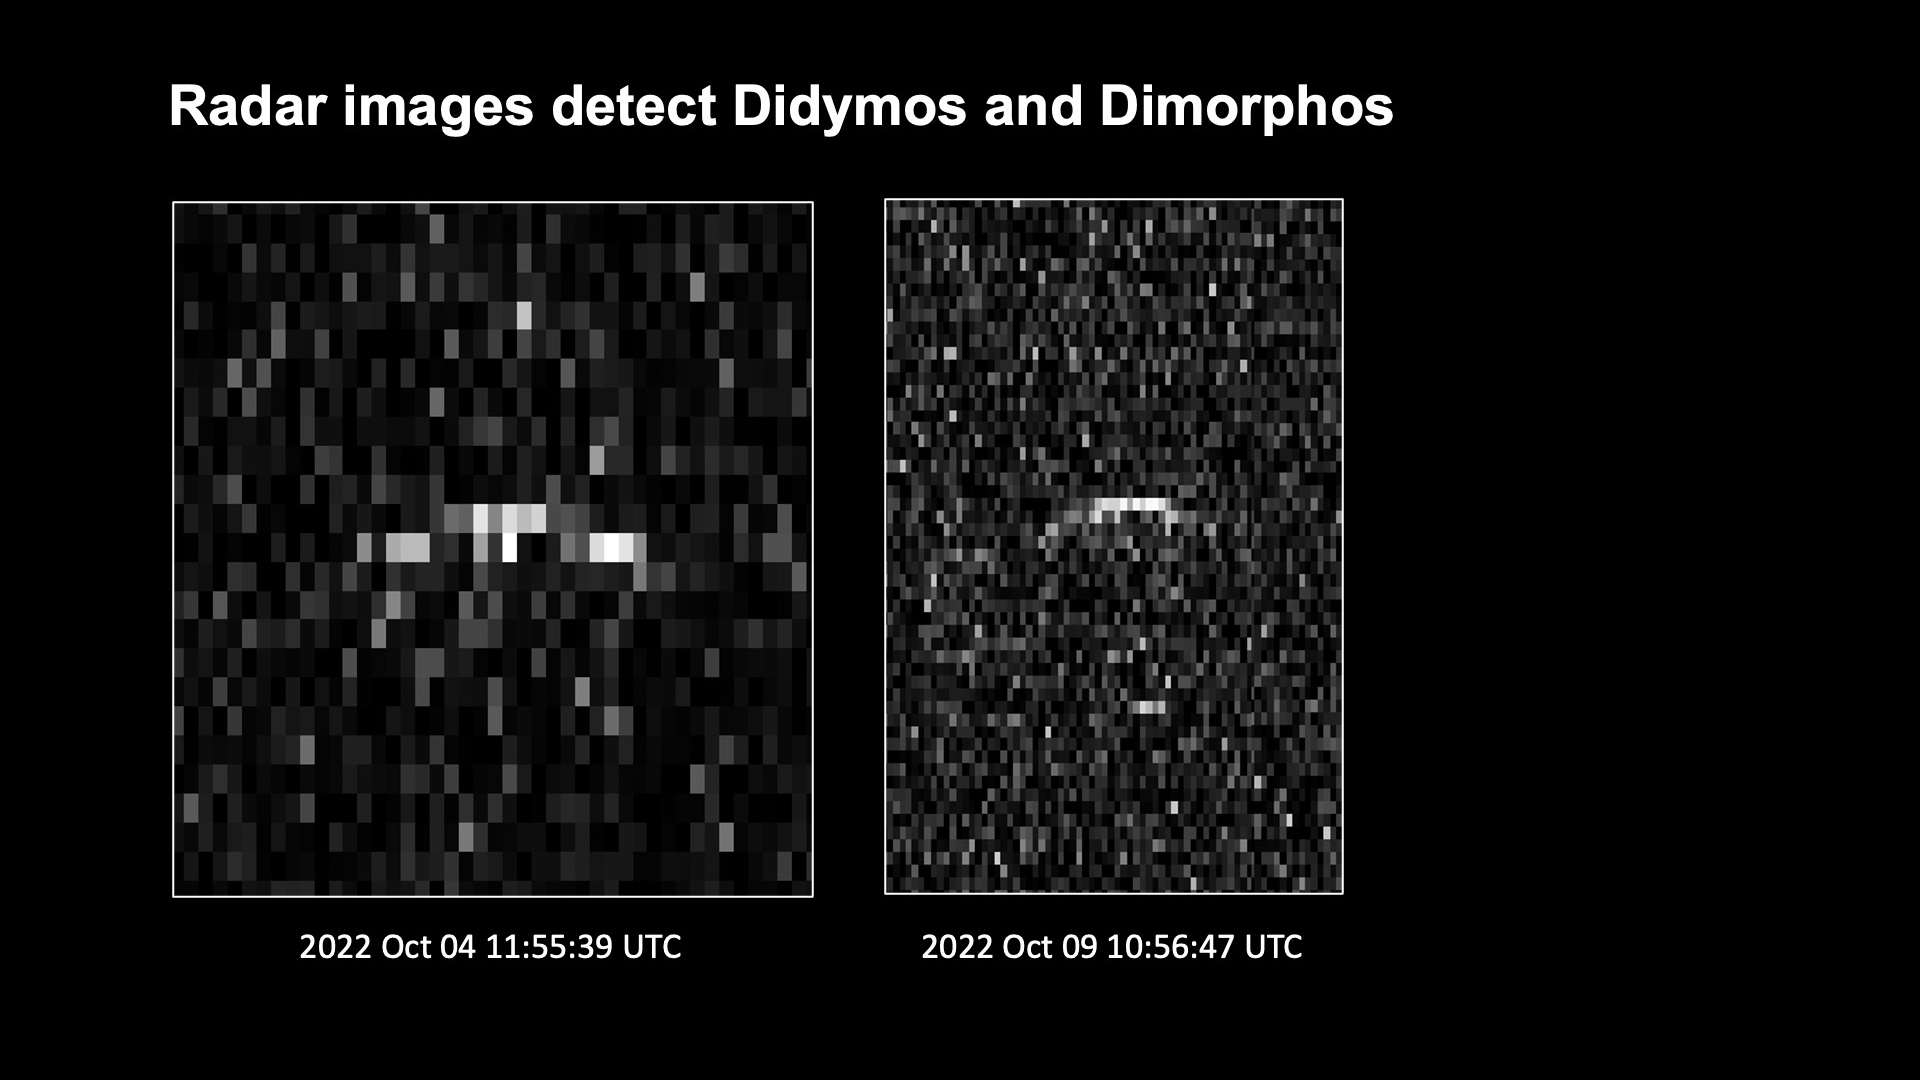 The bright line across the middle of these images, shows the asteroid Didymos. 